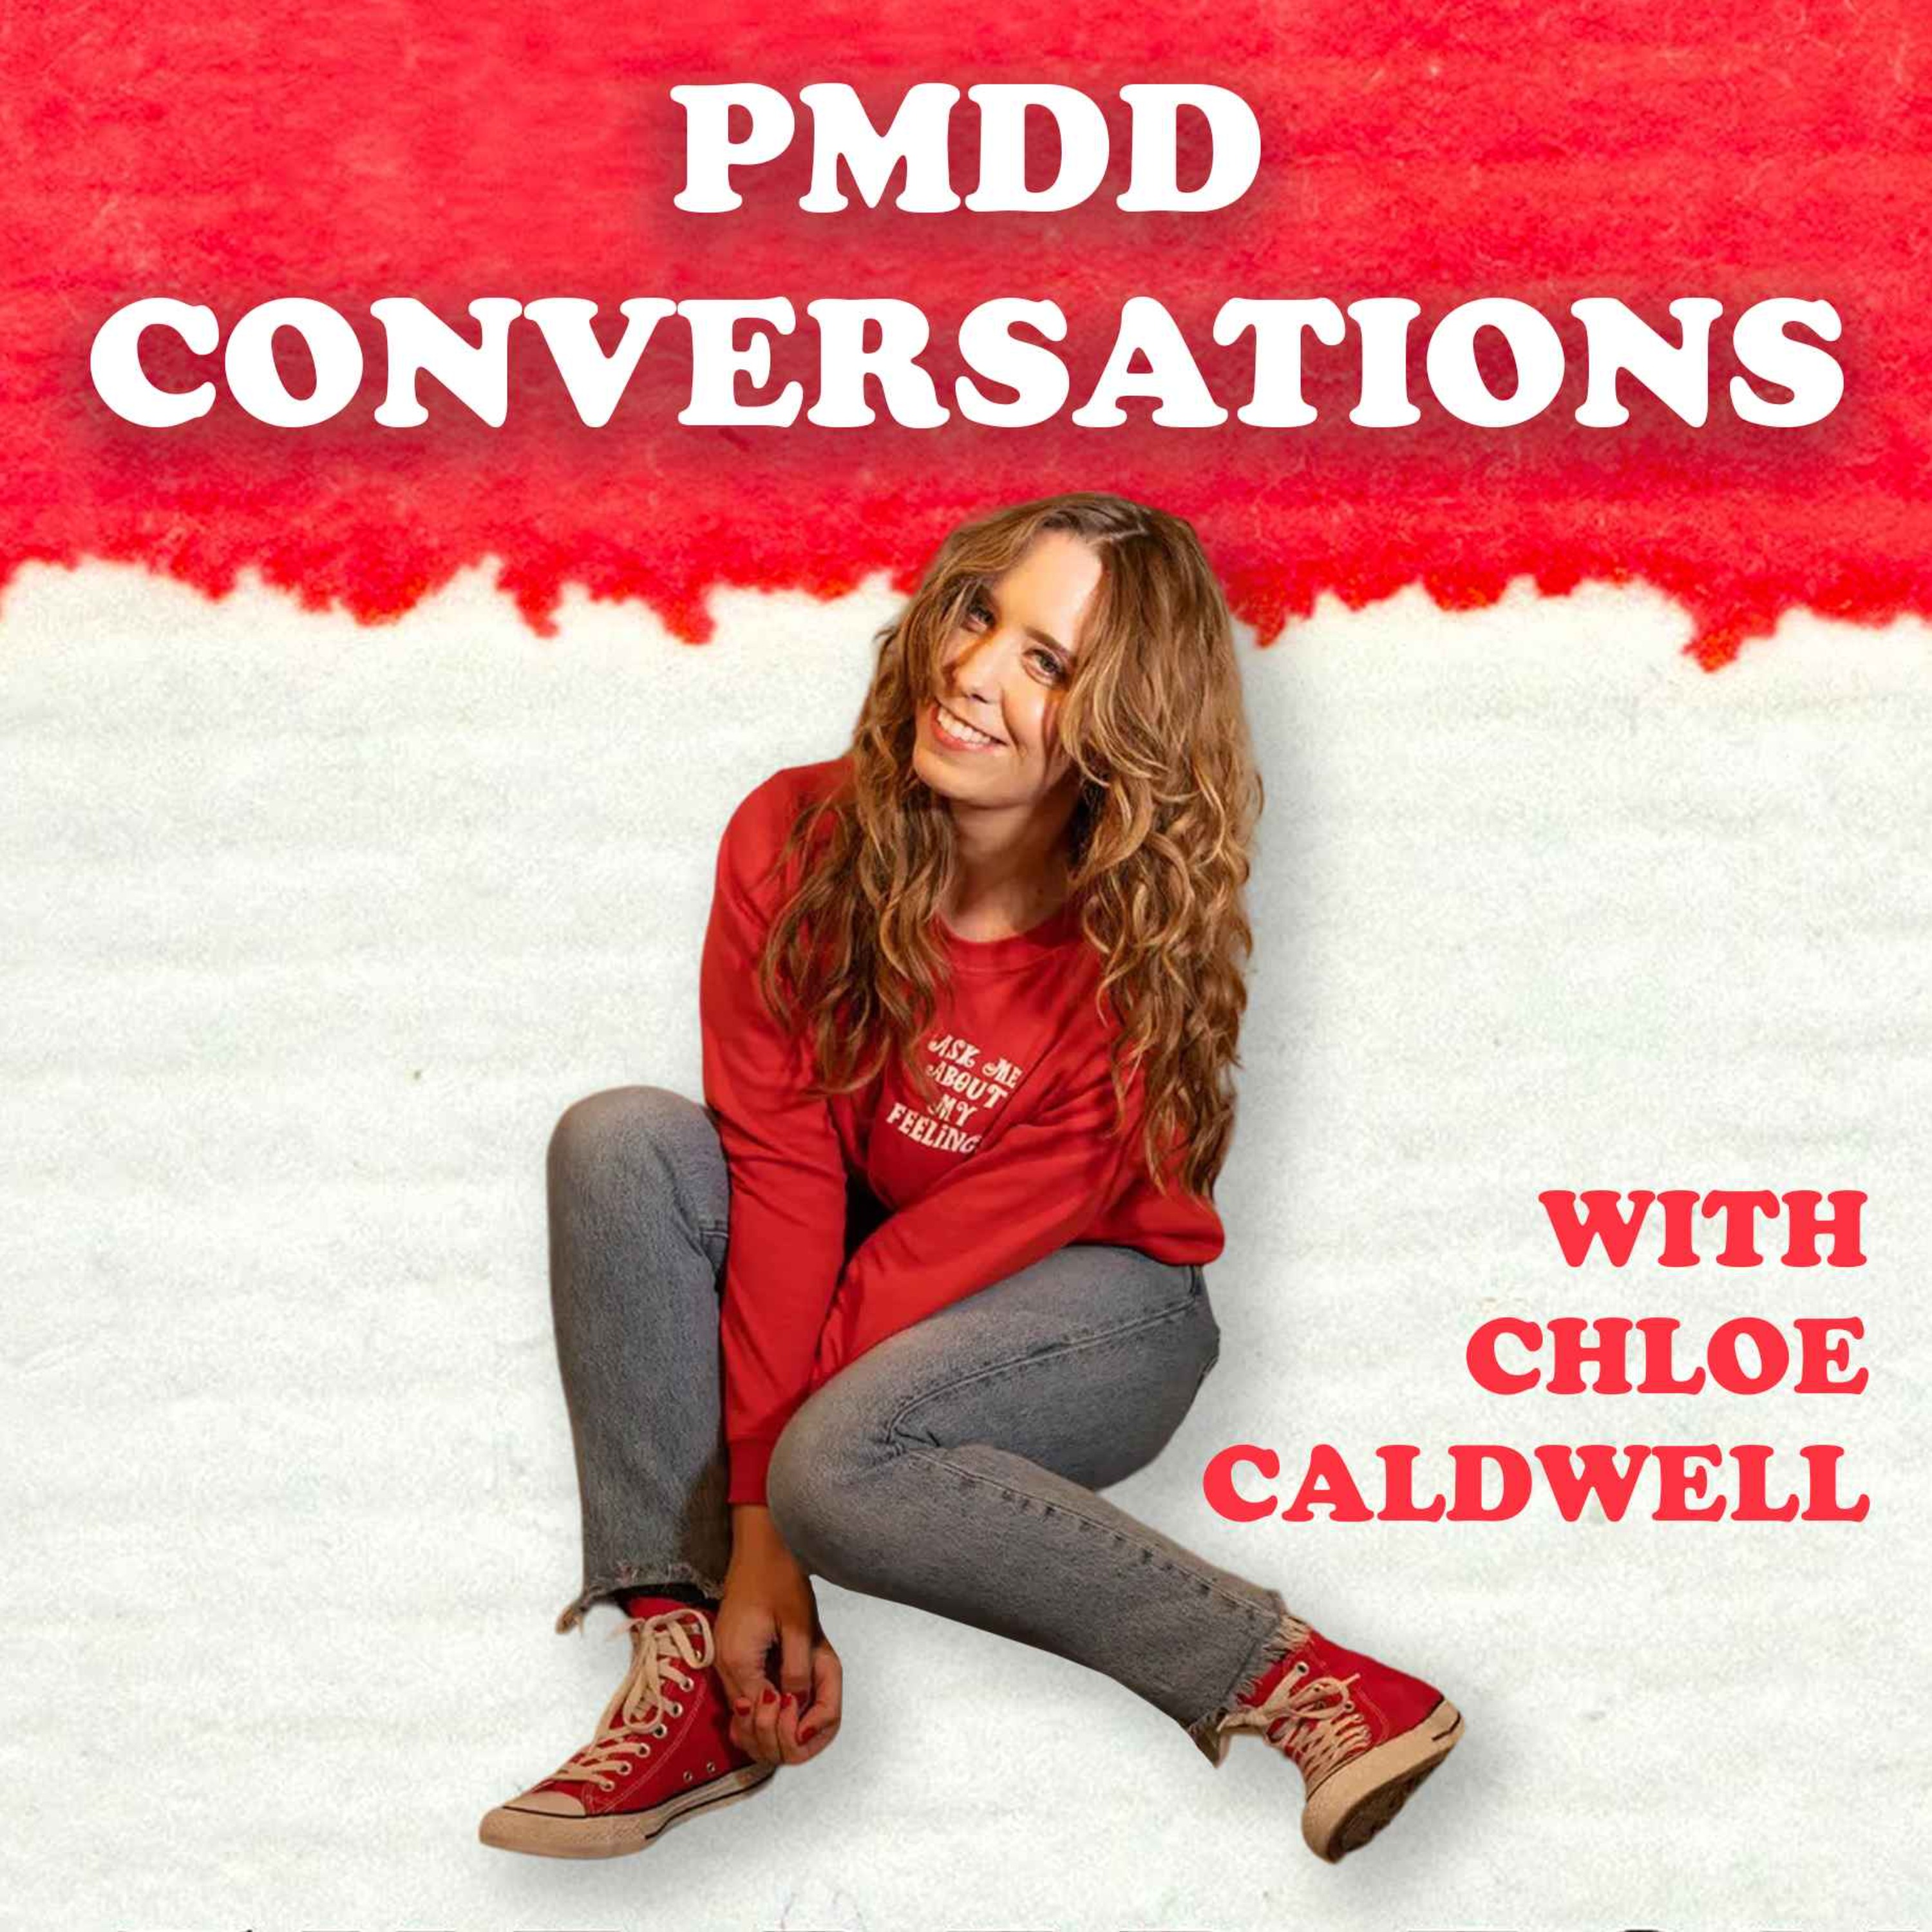 #6 PMDD conversations with Chloe Caldwell